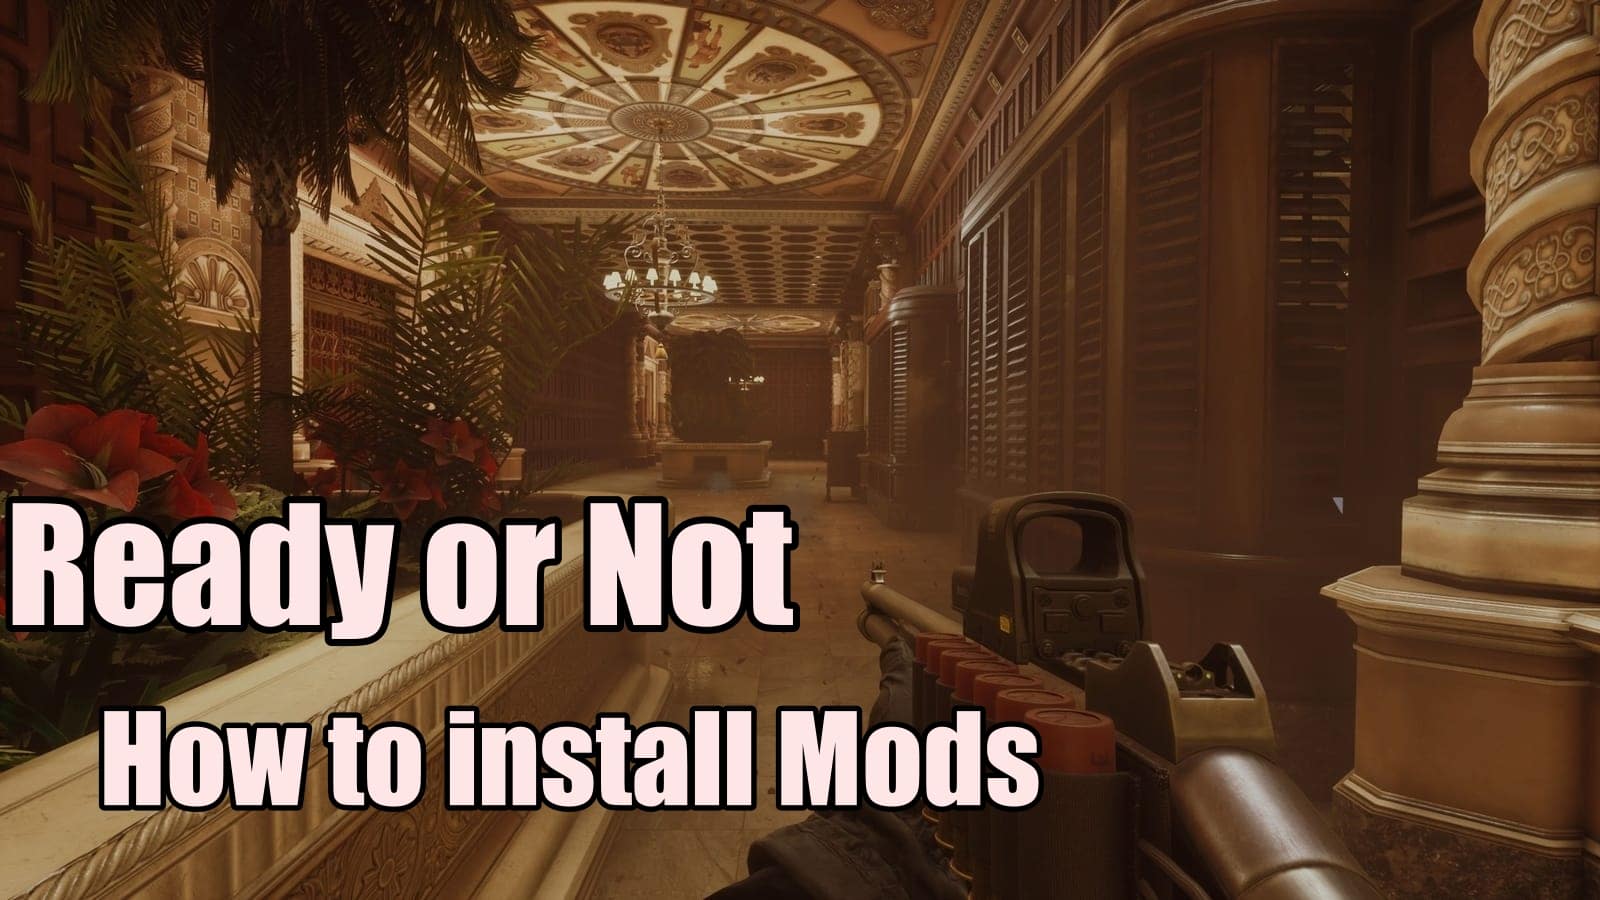 Ready or Not - How to Install Mods